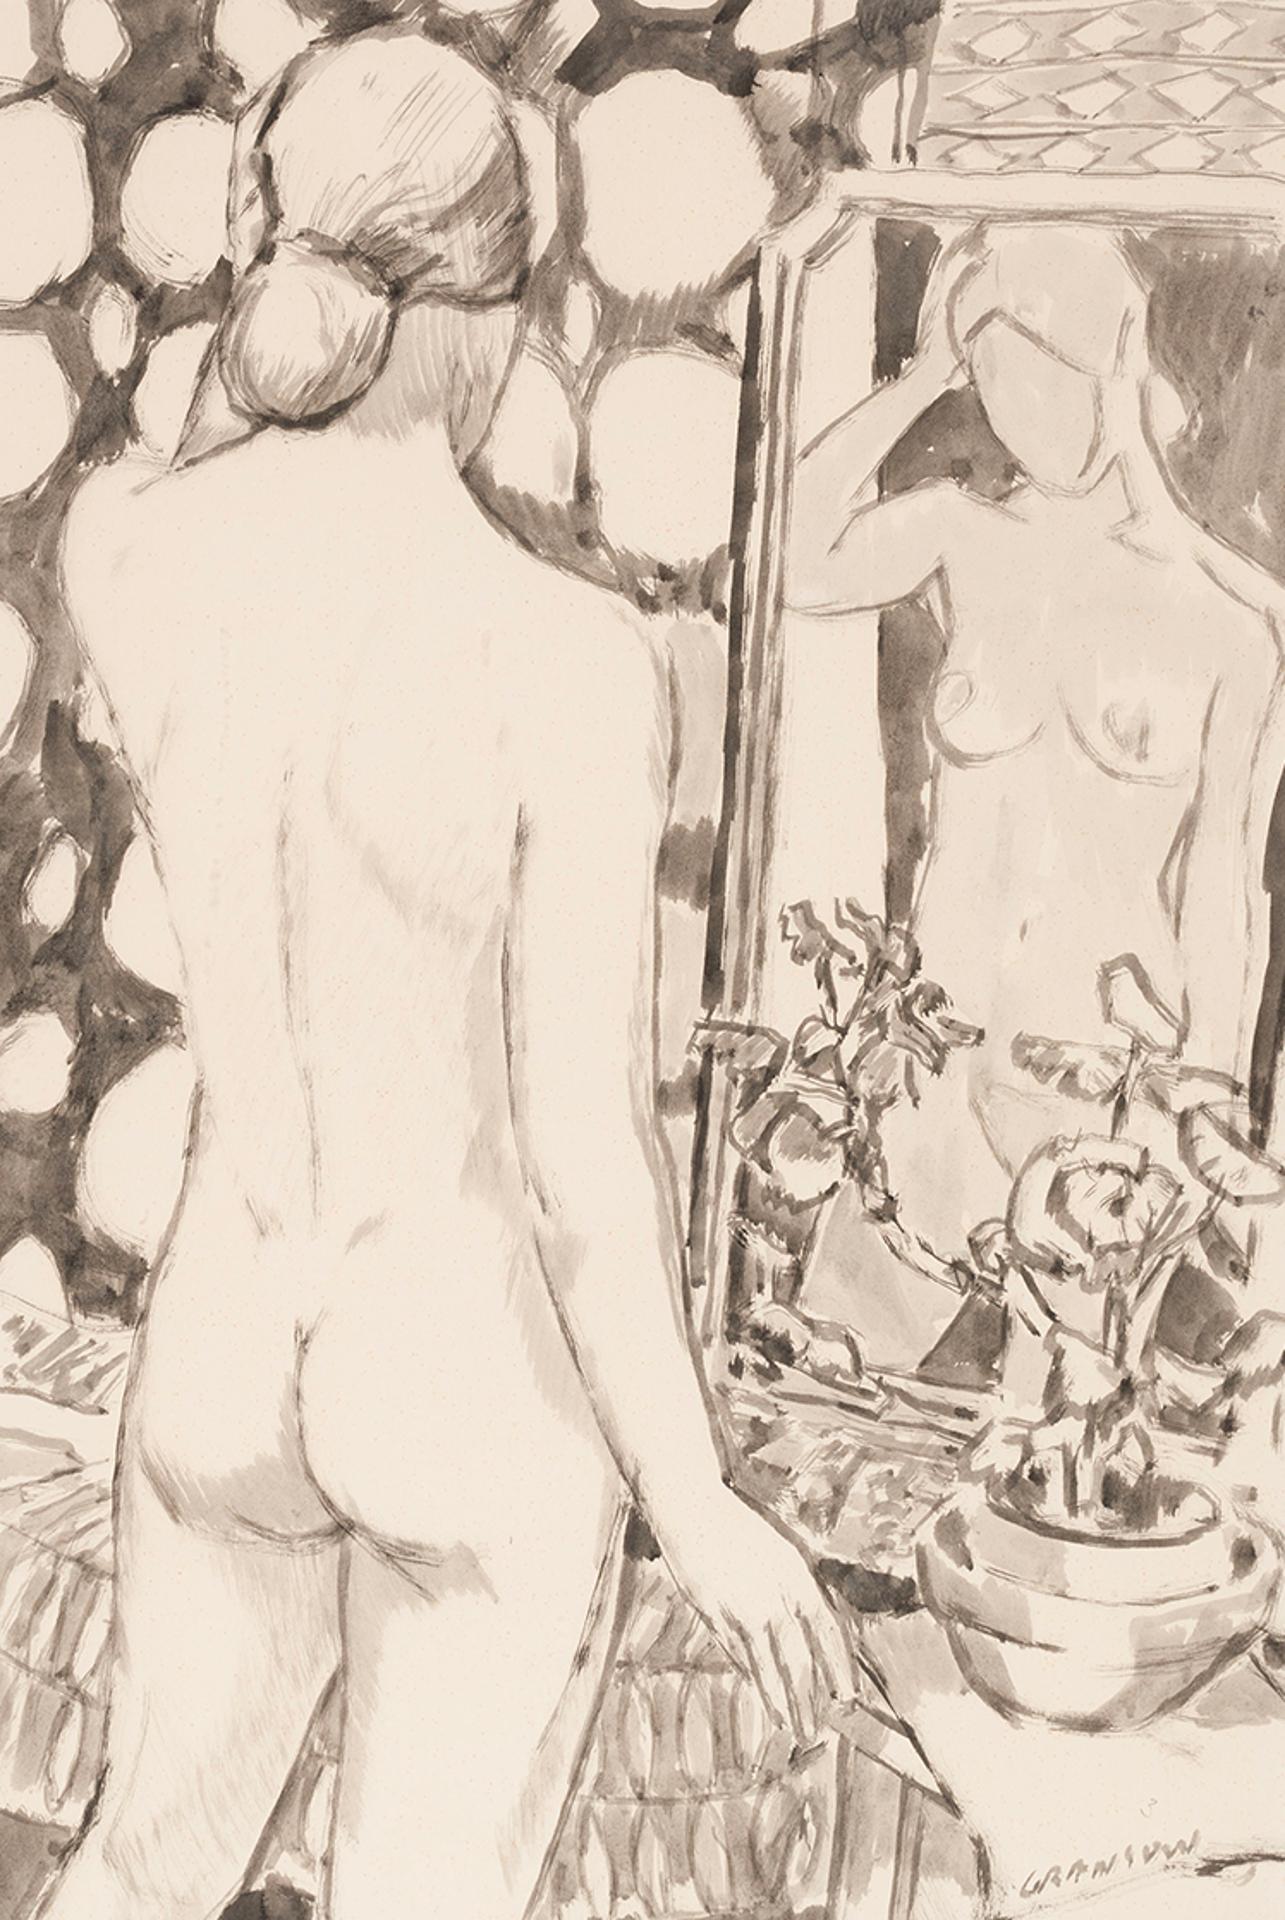 Helmut Gransow (1921-2012) - Nude in a Mirror